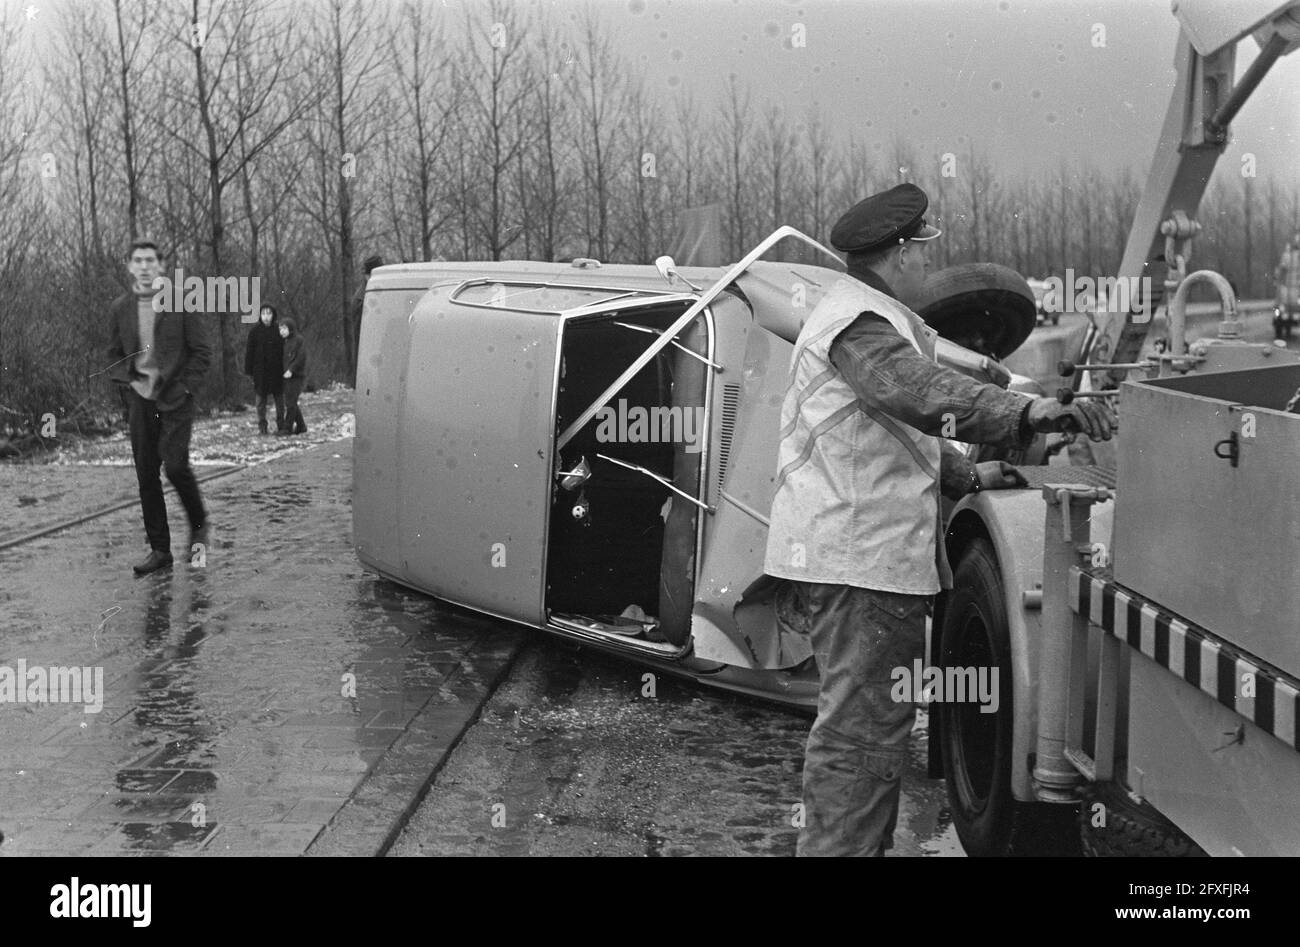 Two autos collide on Gooiseweg, the other skidded, March 31, 1967, cars, accidents, The Netherlands, 20th century press agency photo, news to remember, documentary, historic photography 1945-1990, visual stories, human history of the Twentieth Century, capturing moments in time Stock Photo